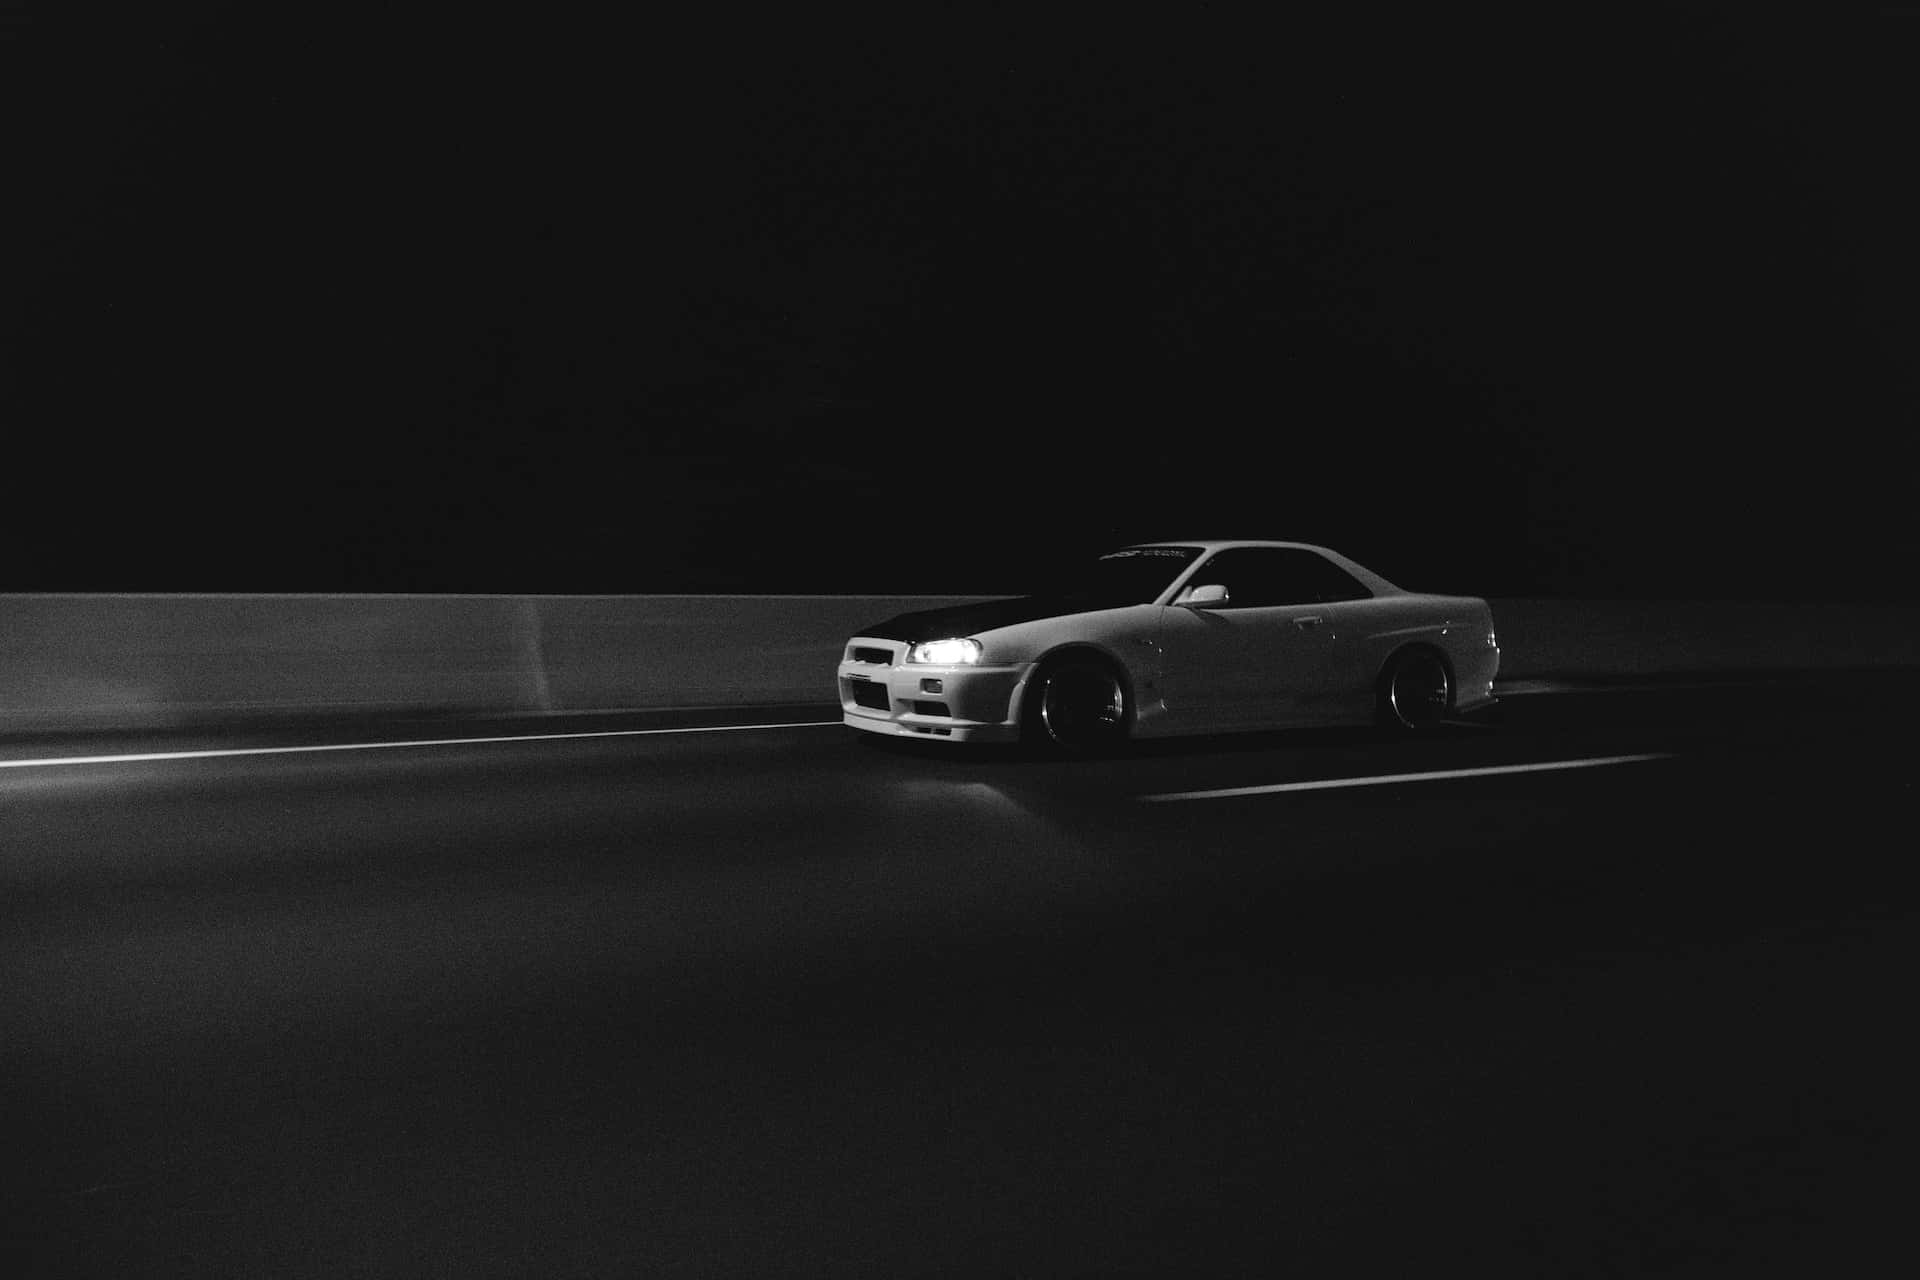 Classic Black and White Car on the Road Wallpaper